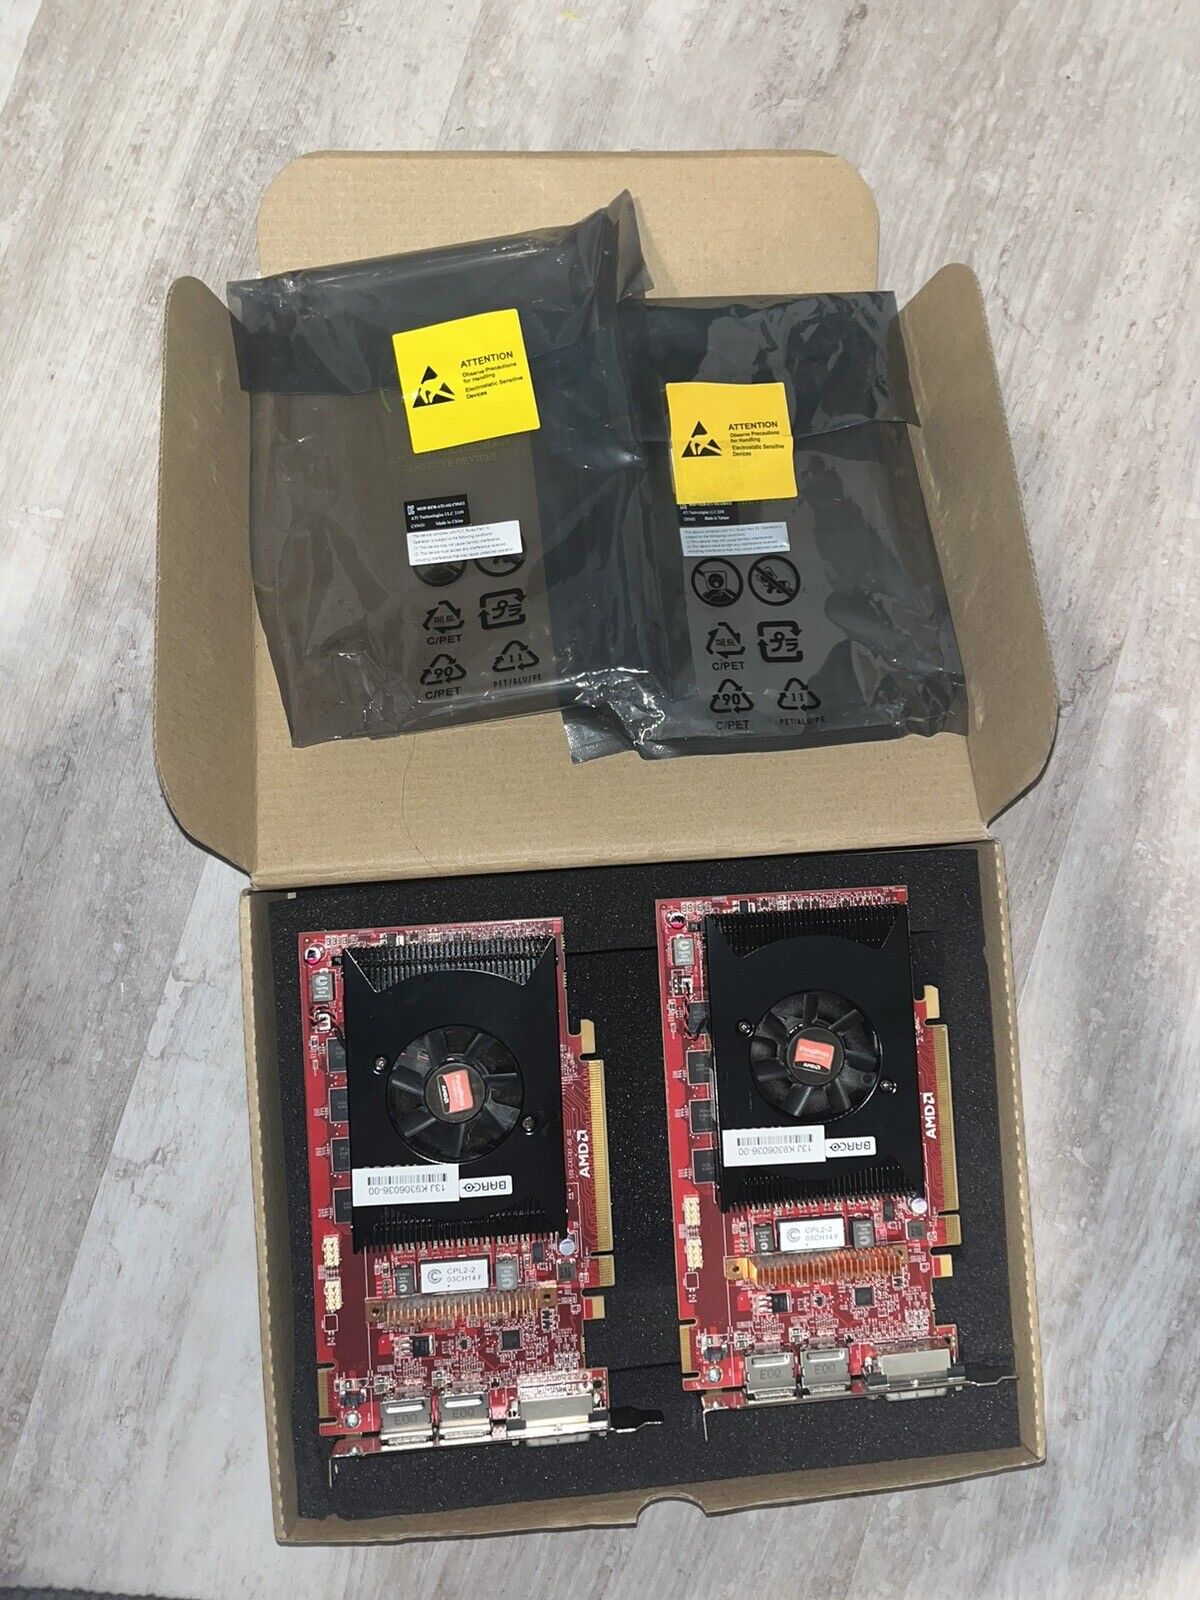 Two AMD FIRE PRO MXRT-5500 2GB PCle TripleHead Graphic Cards